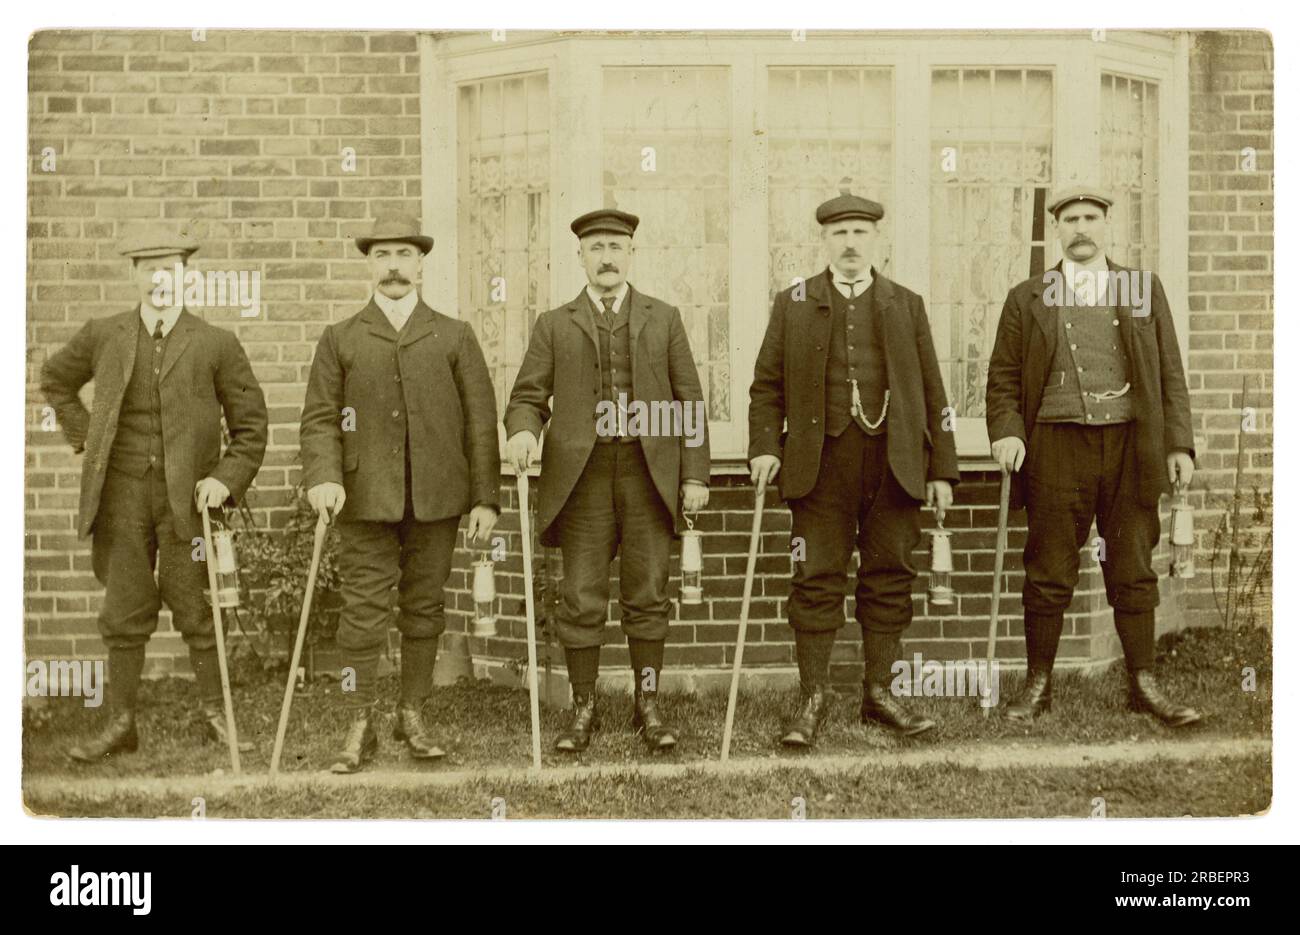 Original Edwardian era postcard of 5 men posing for a photograph together, carrying miners safety lamps, dressed in Sunday best for a walk, possibly miners going for a Sunday hike, possibly estate workers. circa 1910 U.K. Stock Photo